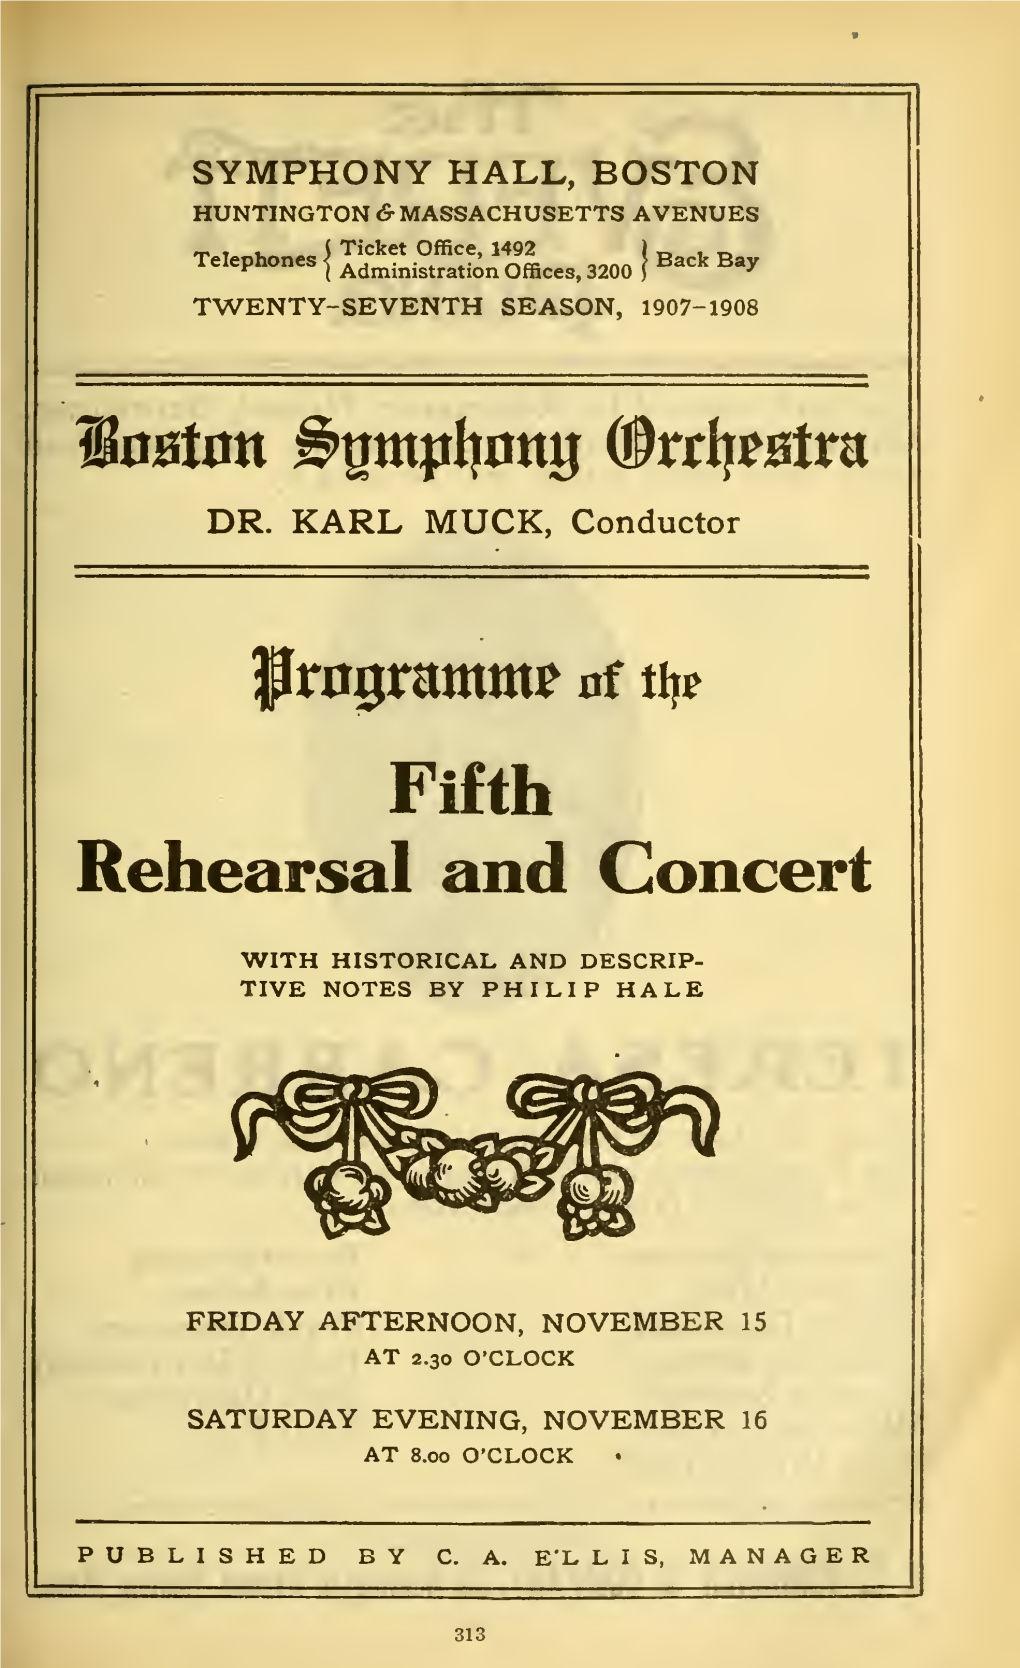 Rehearsal and Concert